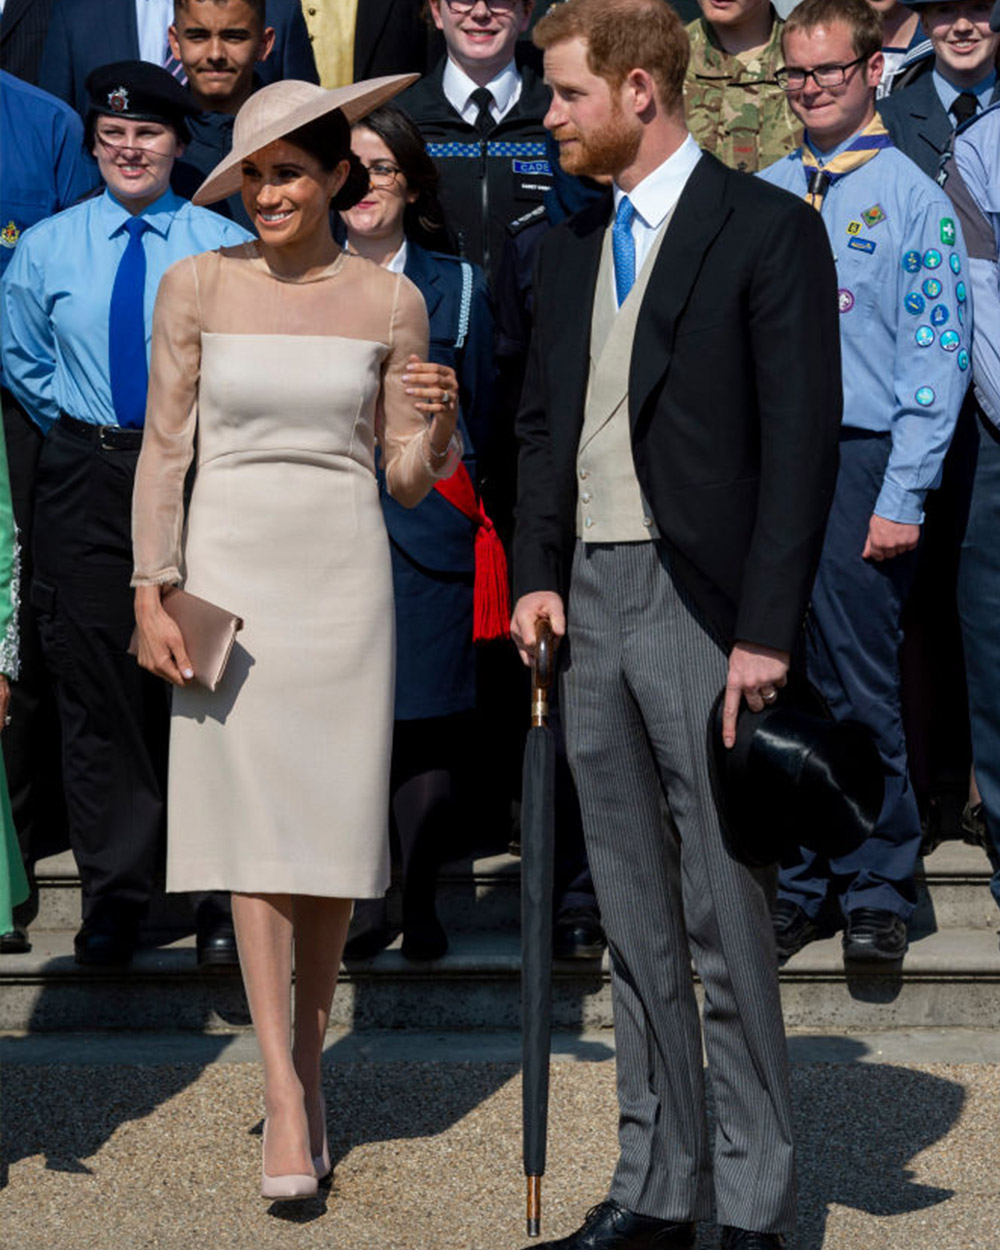 May 22, 2018: Stepping out as the Duchess of Sussex, Meghan sports her post-wedding glow to Prince Charles' 70th birthday garden party at Buckingham Palace. Meghan wears a blush, sleeved sheath dress by GOAT, a bespoke Phillip Treacy hat, Vanessa Tugendhaft rose-shaped diamond earrings and Wilbur & Gussie oyster silk clutch.